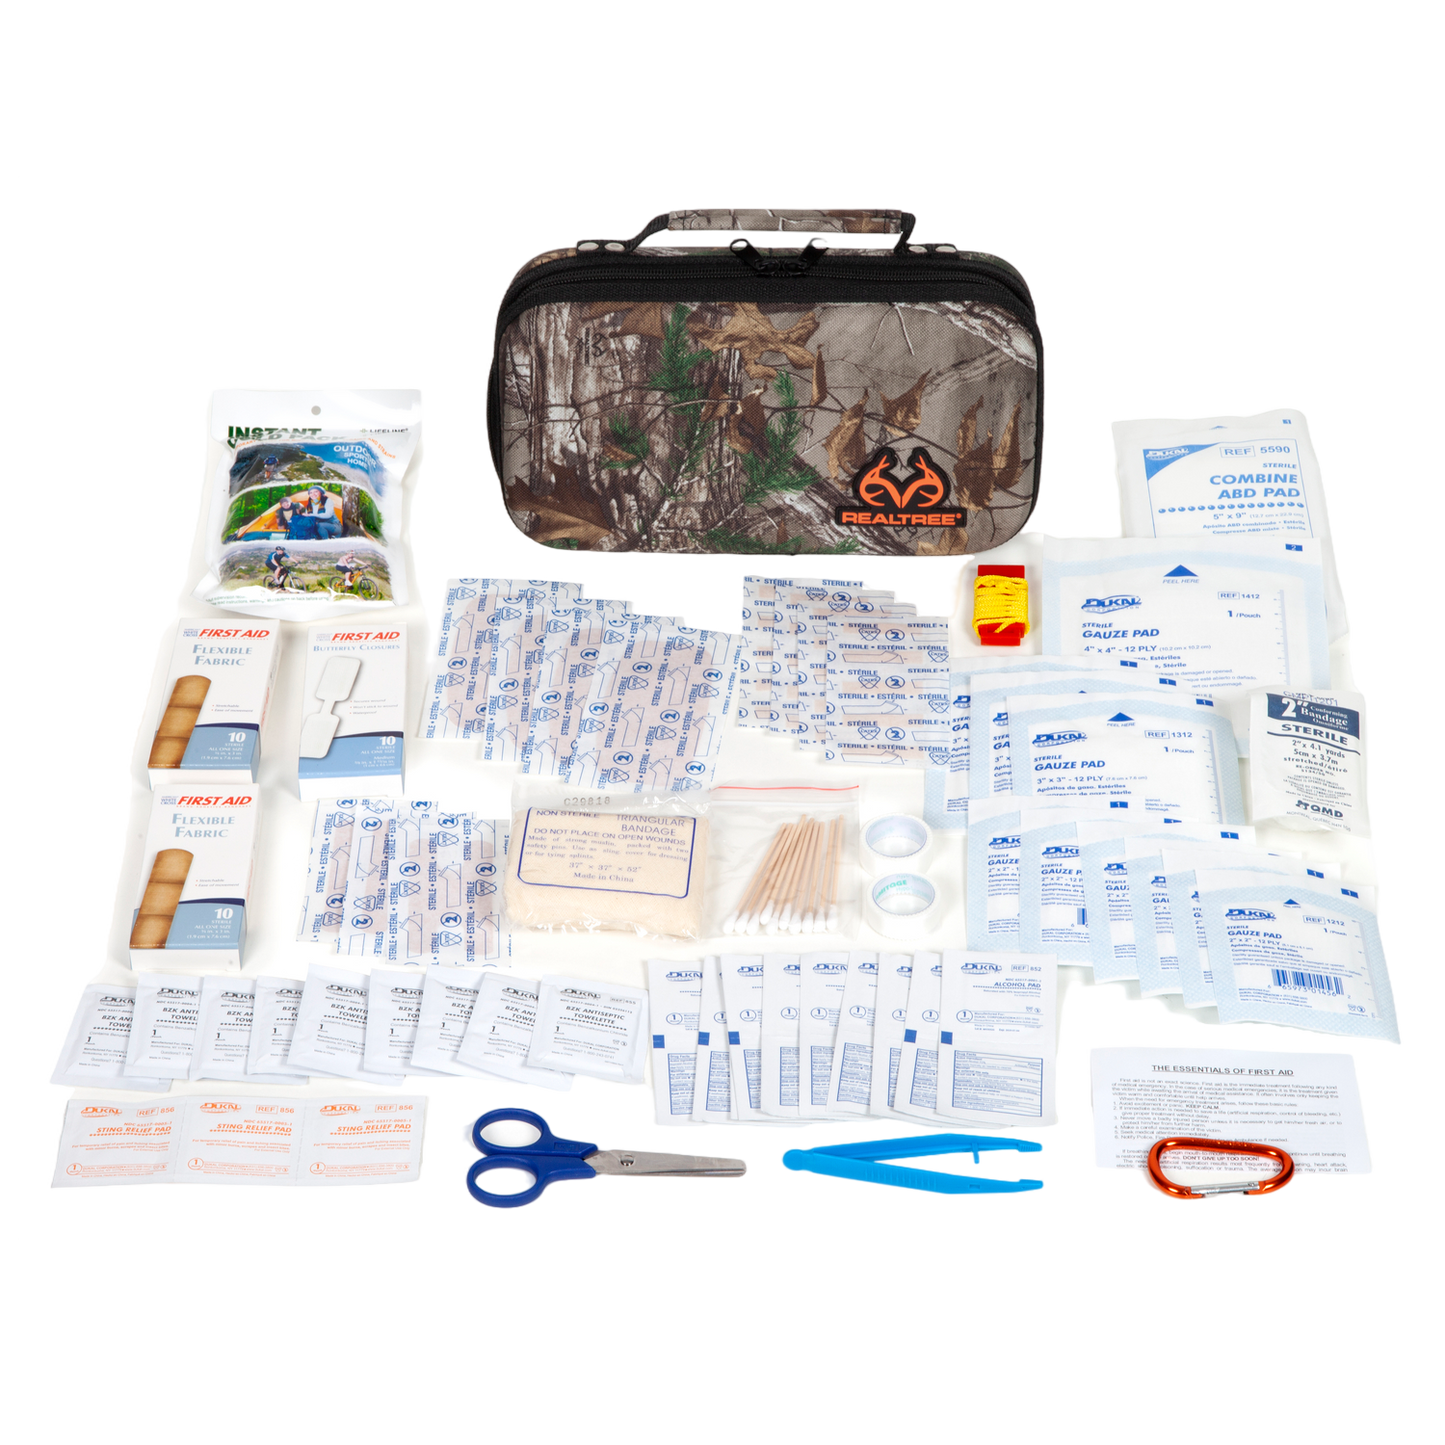 REALTREE DELUXE HARD-SHELL FOAM FIRST AID KIT